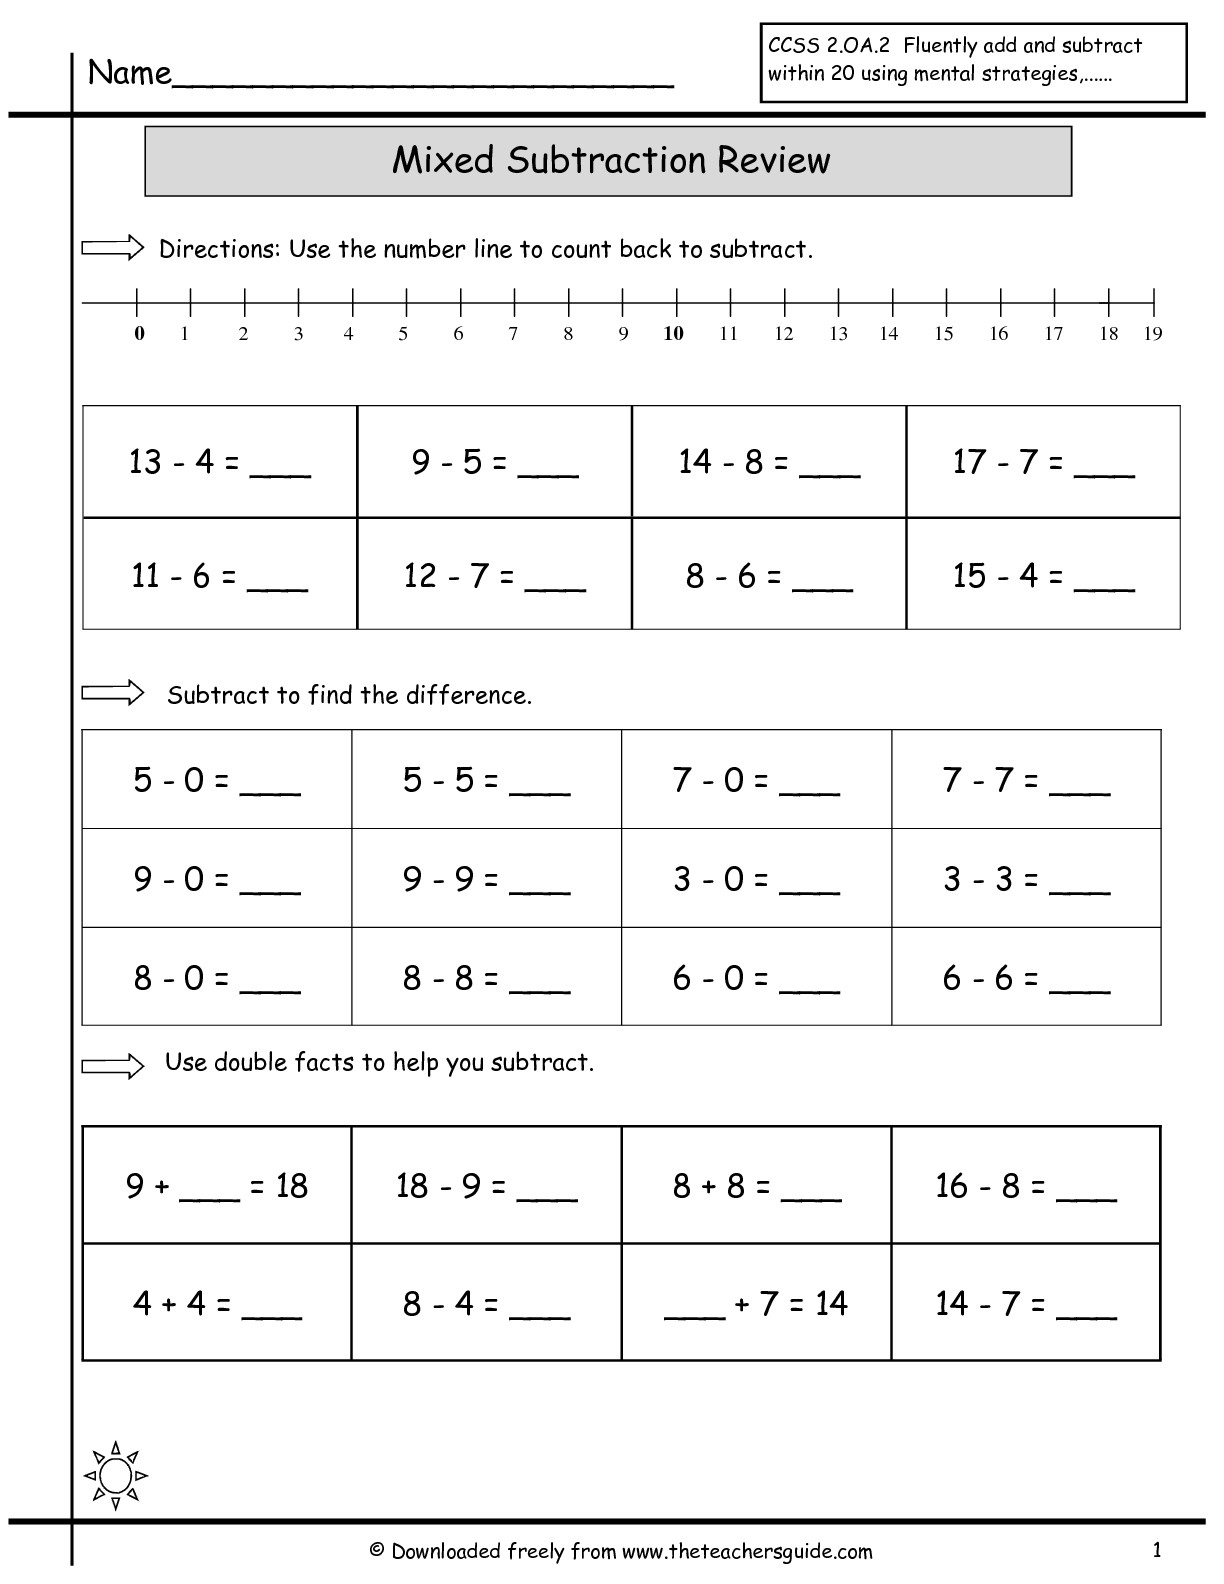 other-worksheet-category-page-1275-worksheeto